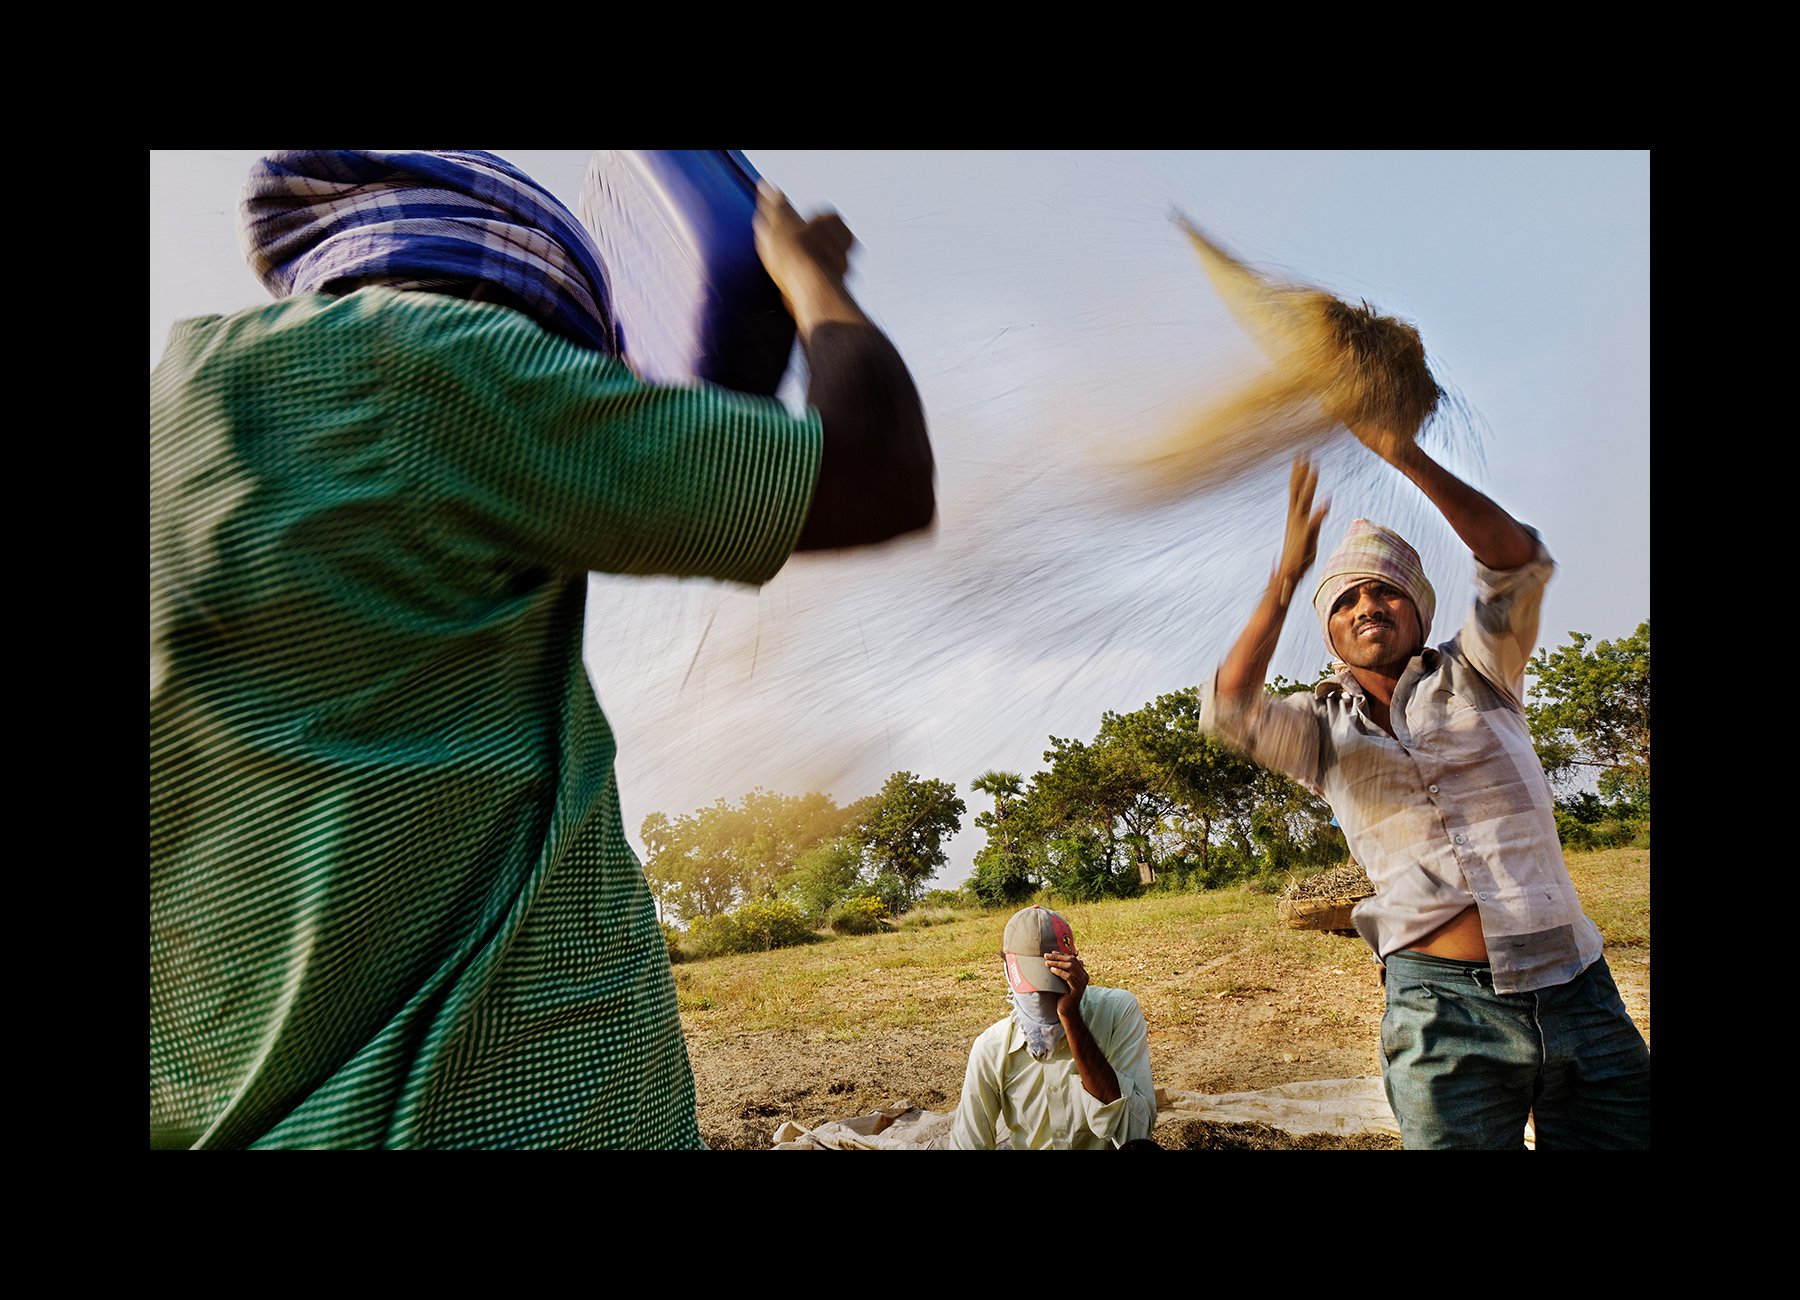  Agricultural workers harvest black whole grain in the village of Uchapalli, India on Jan. 16, 2016. 